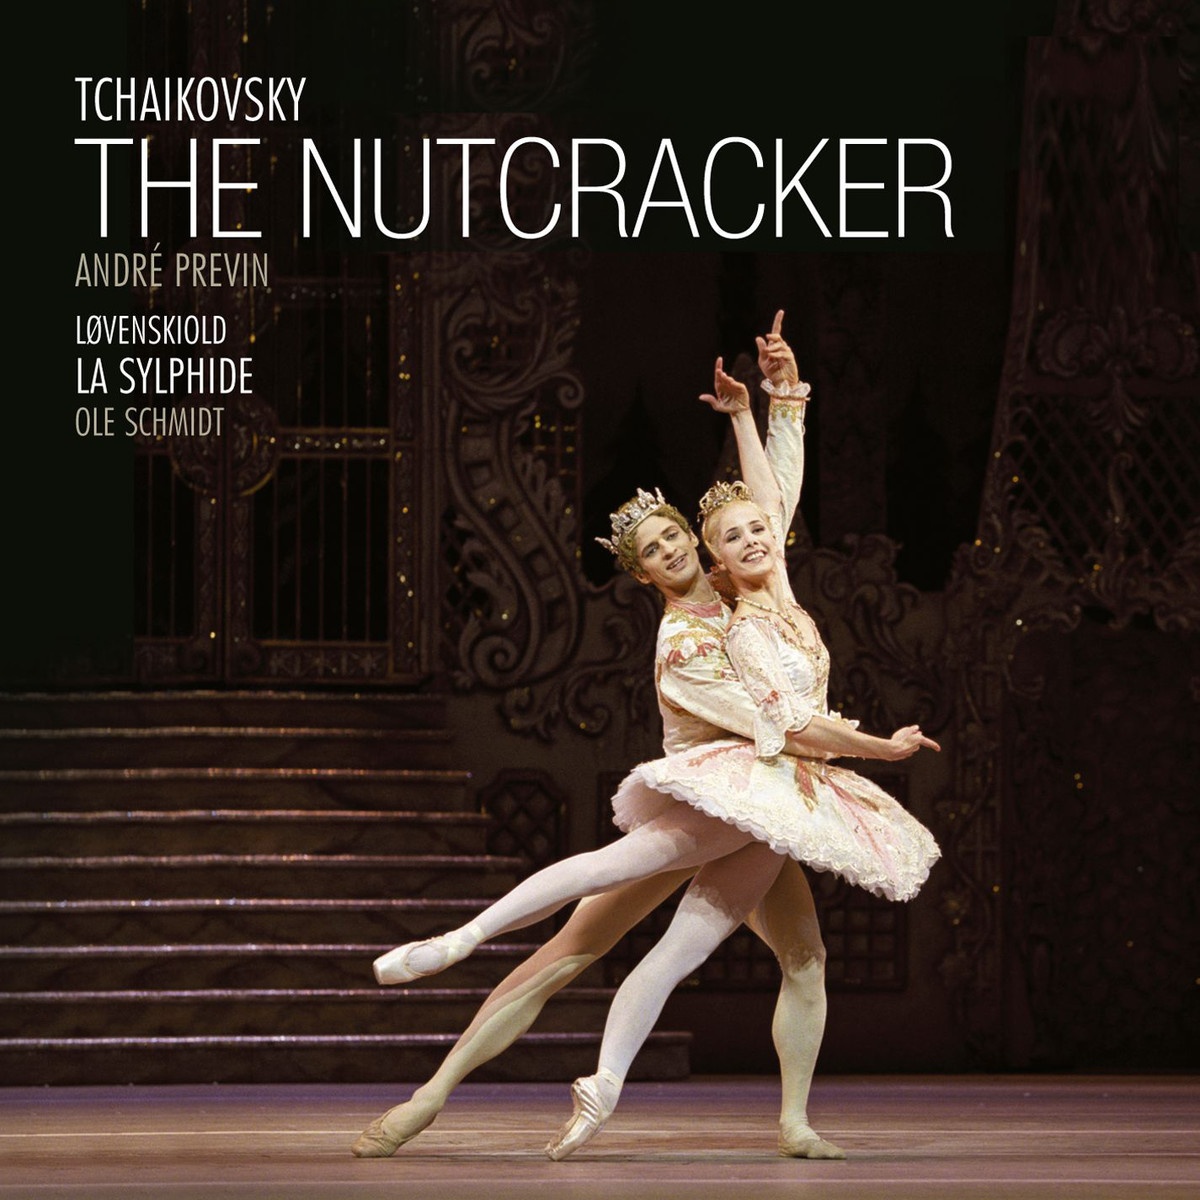 The Nutcracker - Ballet in two acts Op. 71, Act I: Waltz of the Snowfalkes